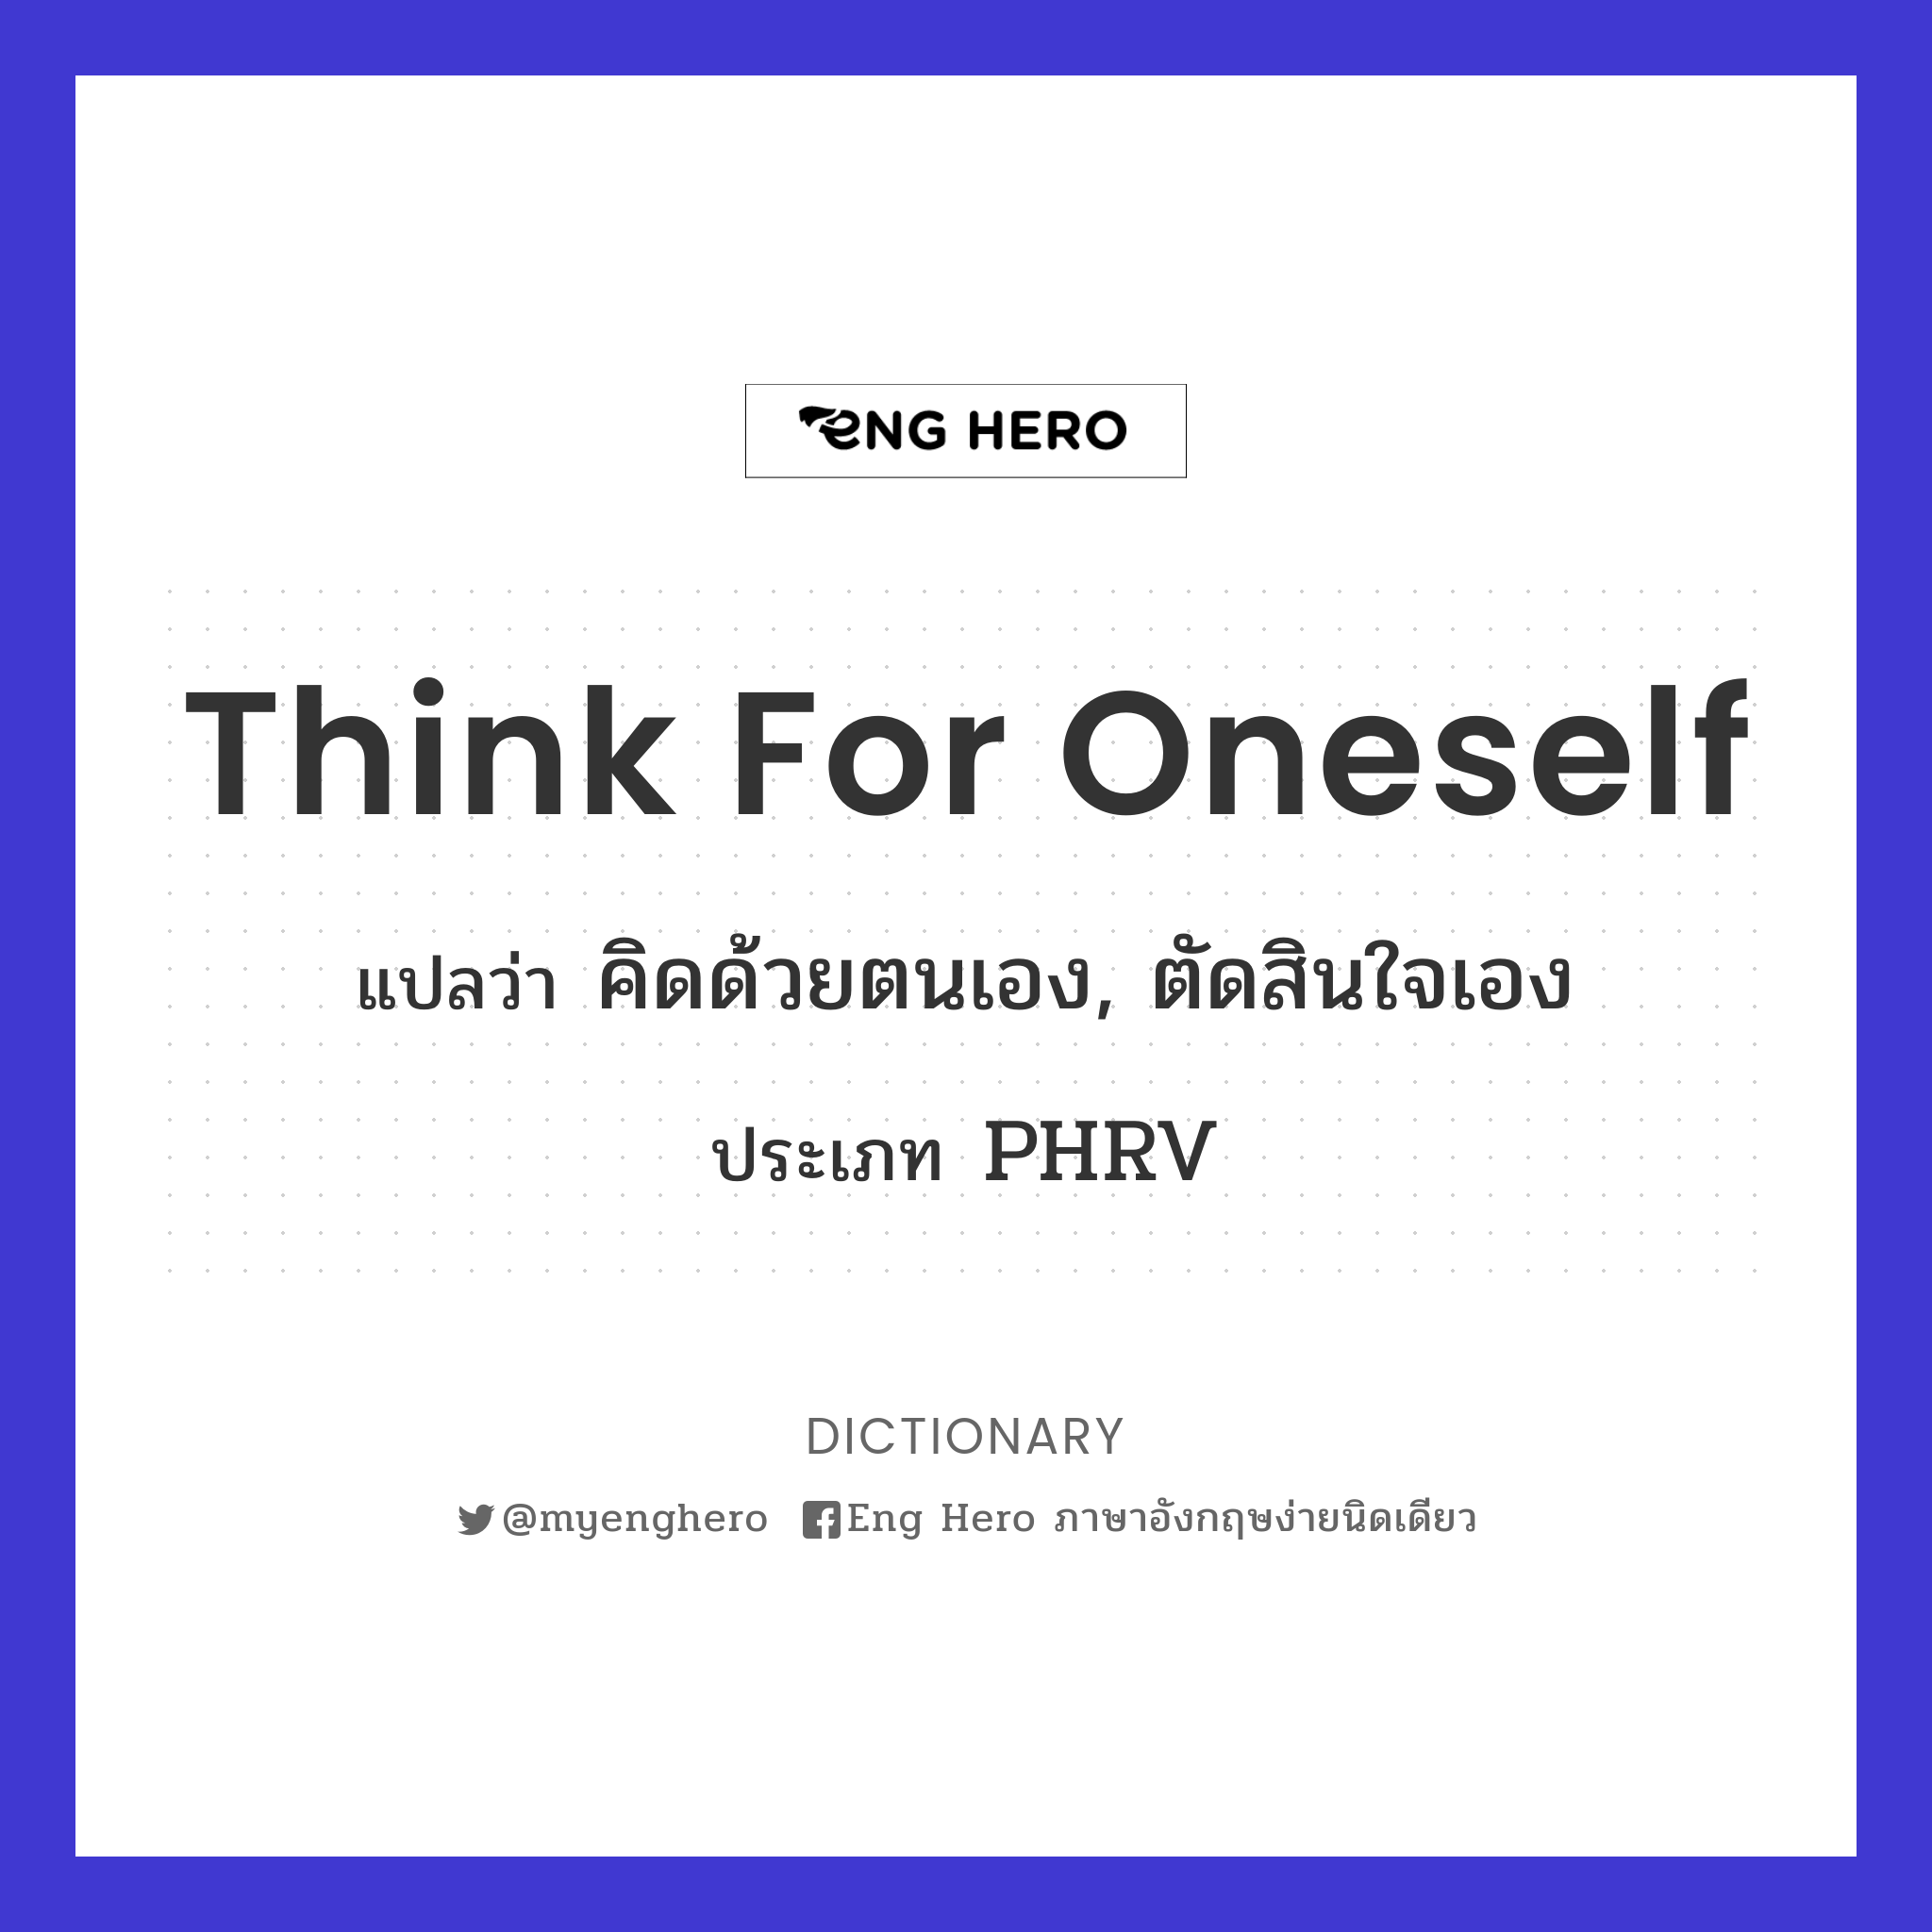 think for oneself